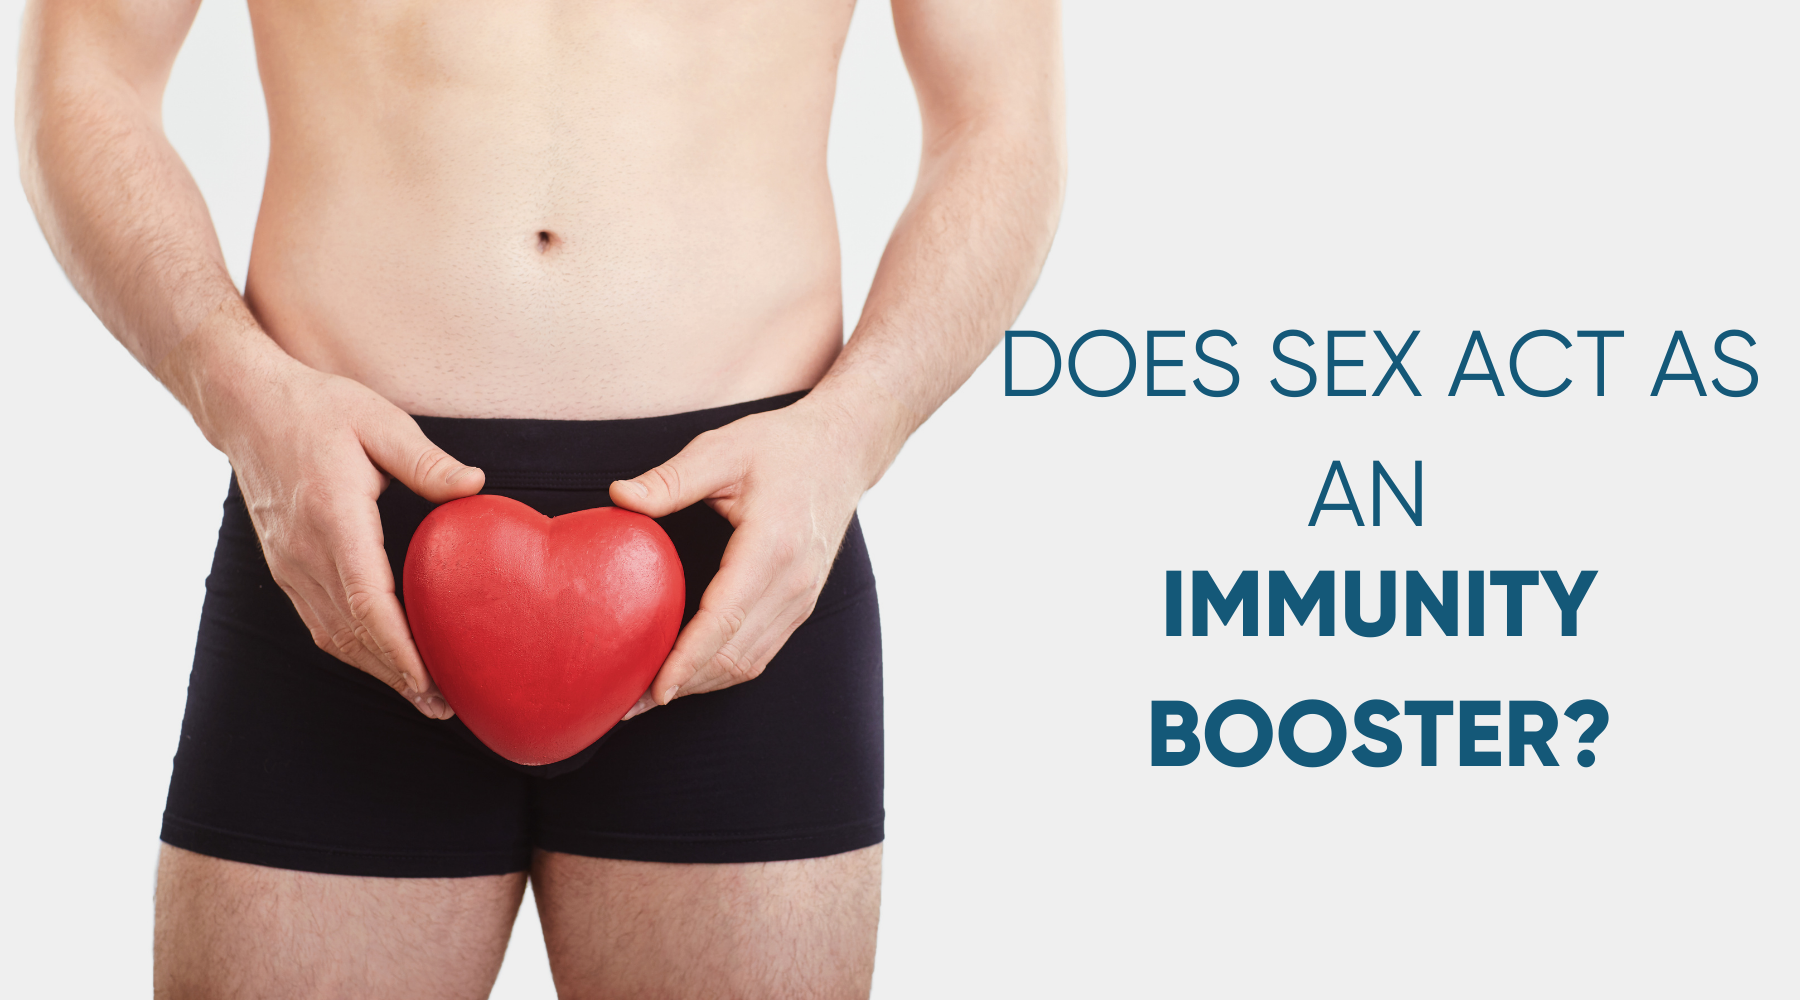 DOES SEX ACT AS AN IMMUNITY BOOSTER?